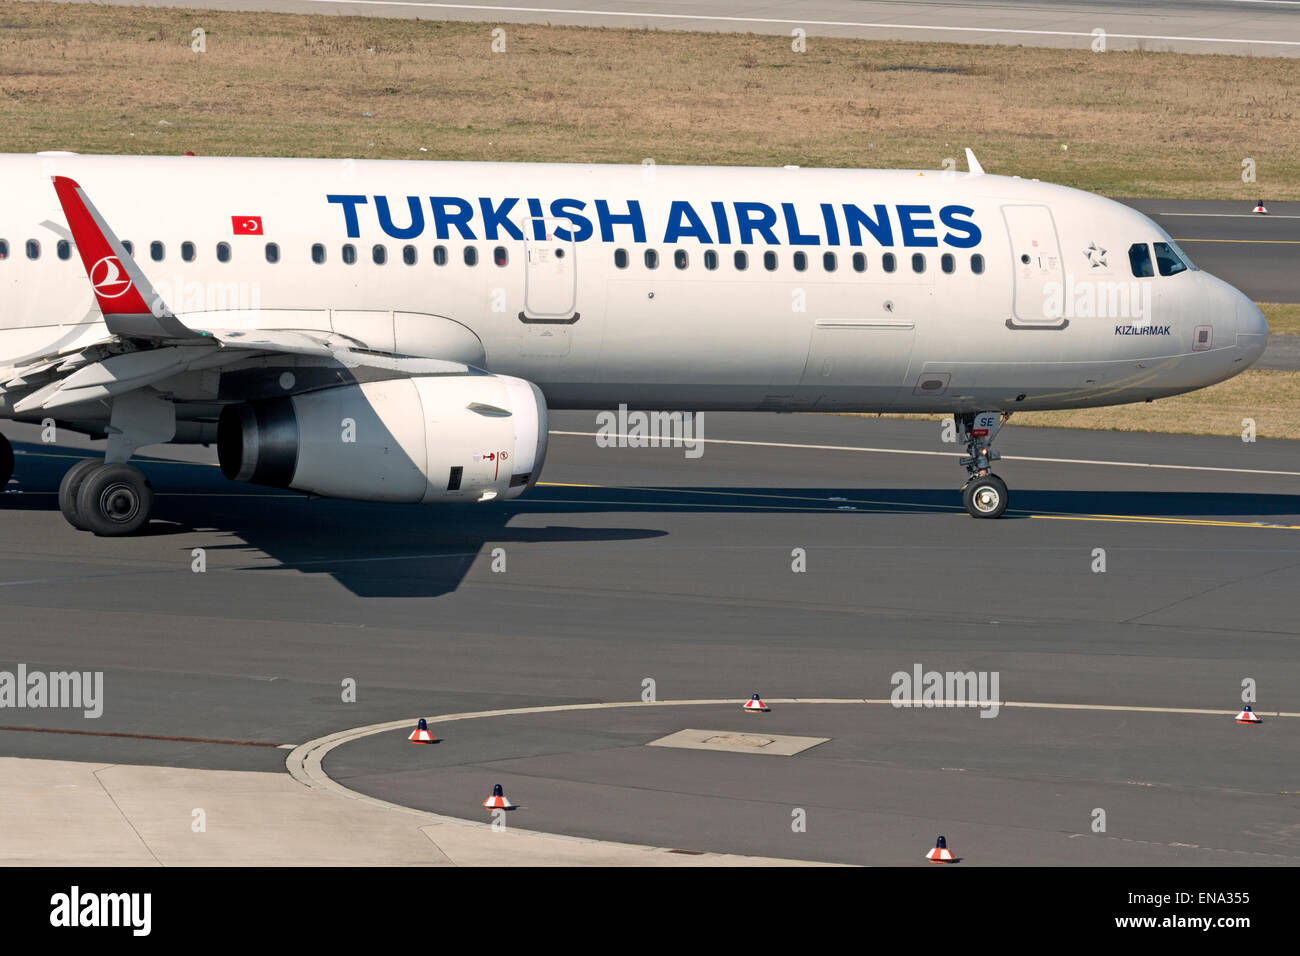 Turkish Airlines Airbus A320 Dusseldorf Germany Stock Photo